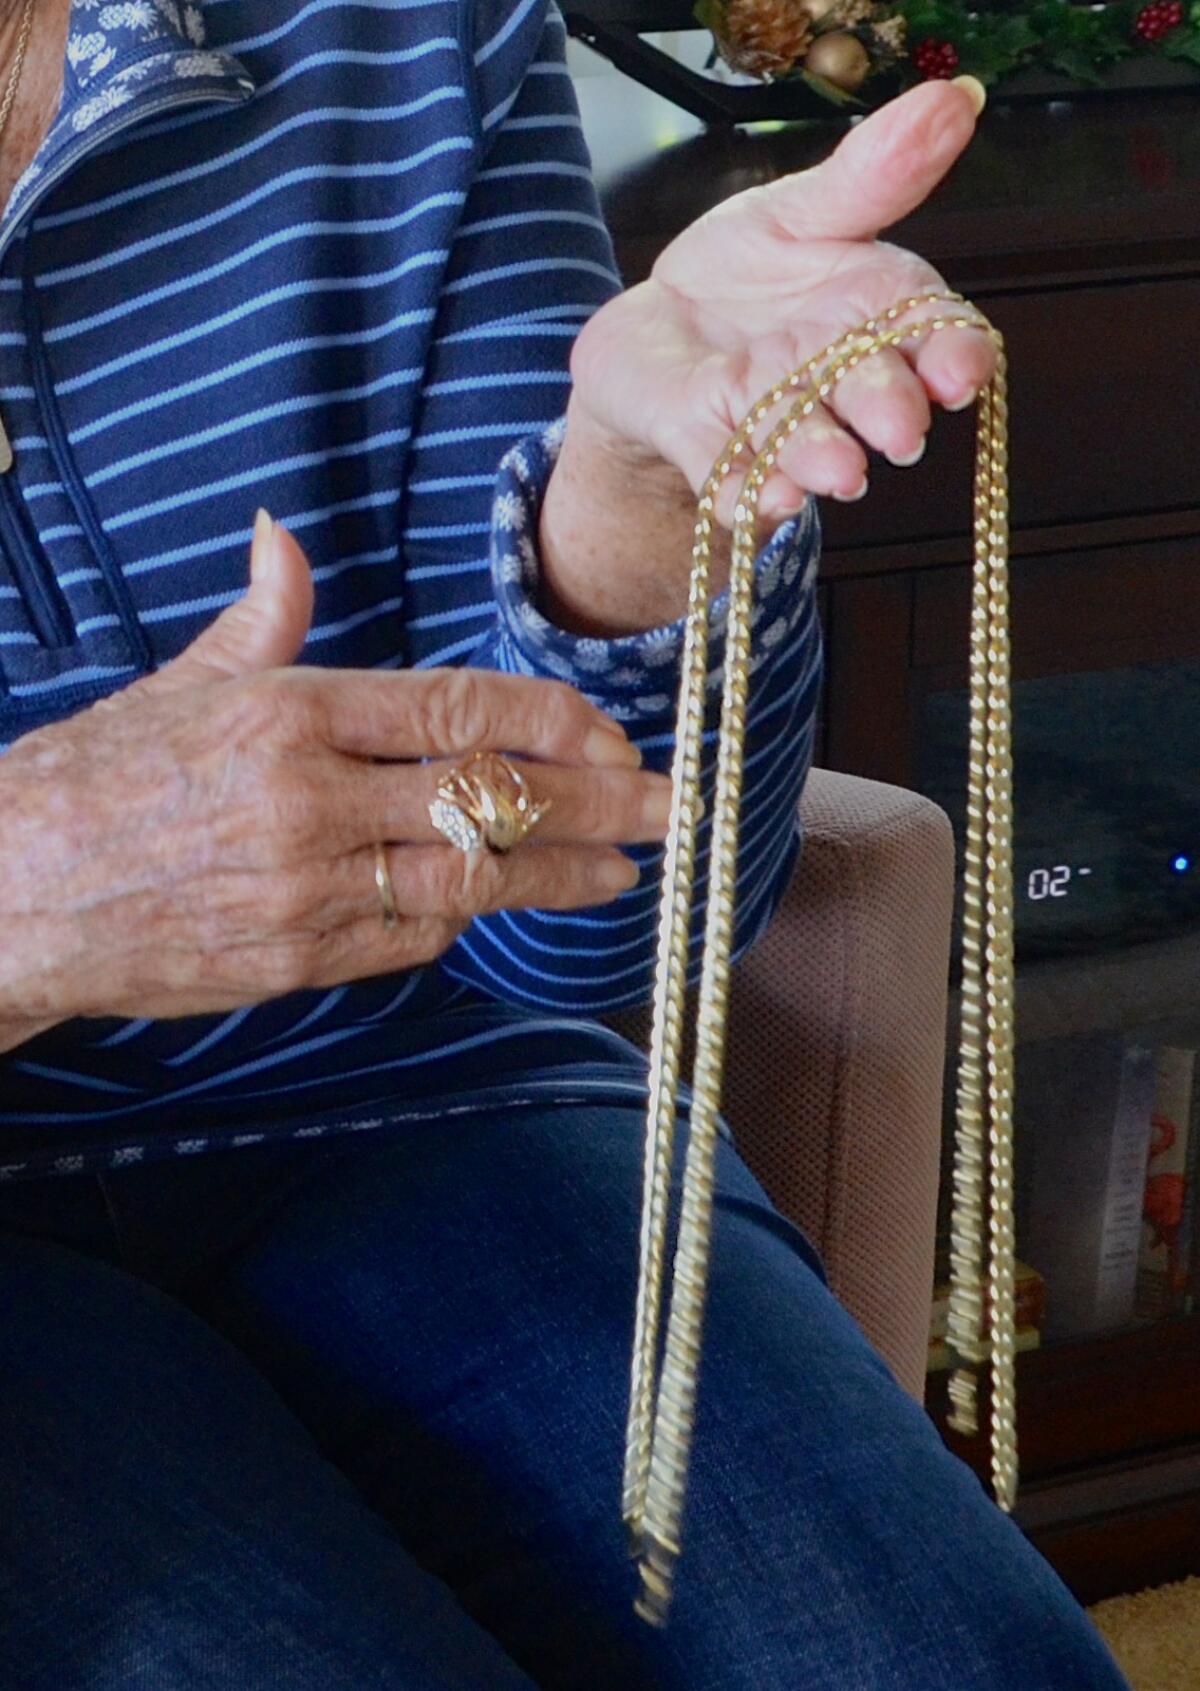 A victim of jewelry swap scam holds costume jewelry necklaces and ring given to her by a thief.